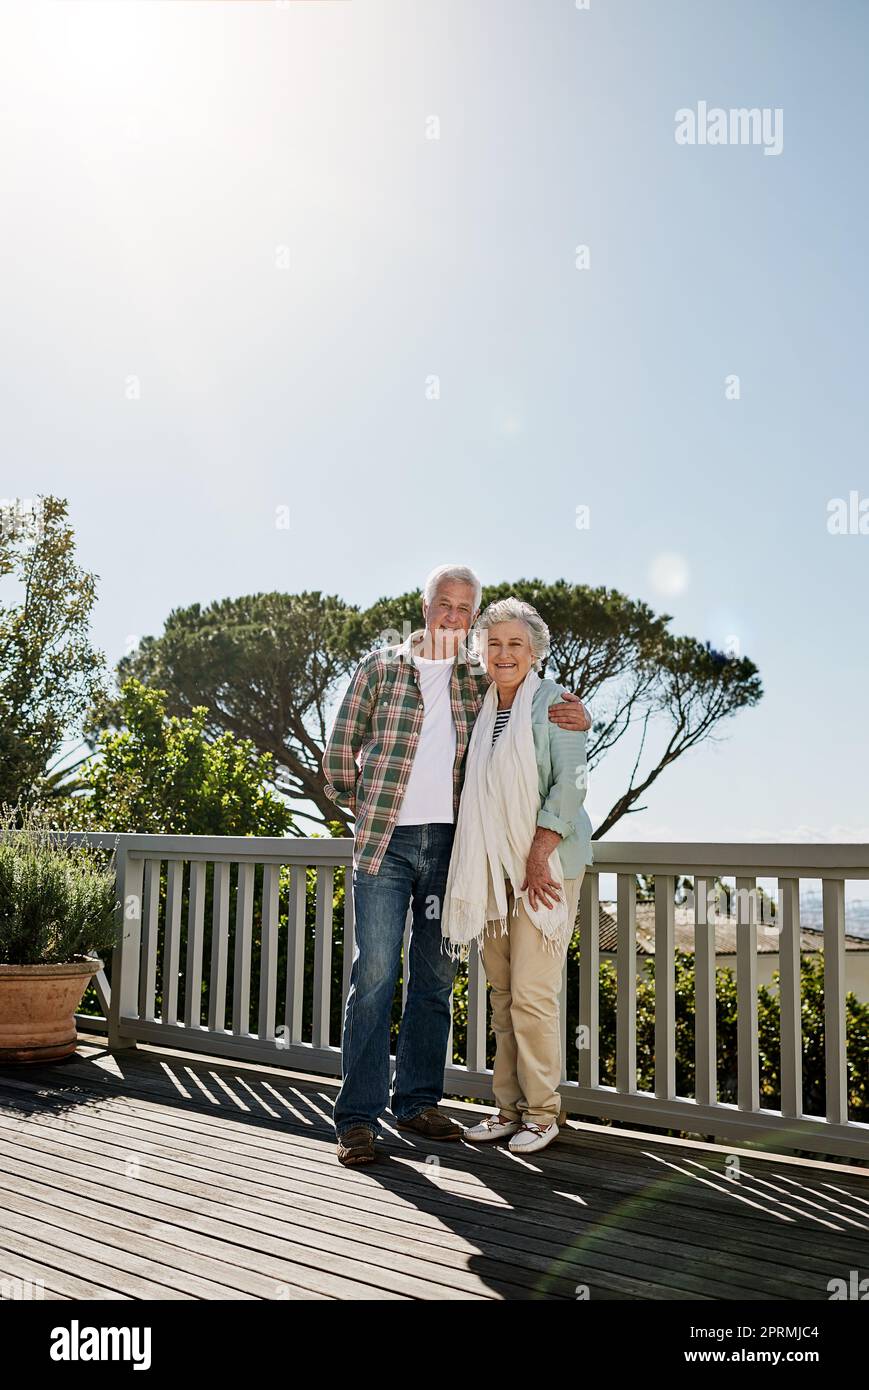 The days just keep getting better and better. a happy senior couple relaxing together on the patio at home. Stock Photo